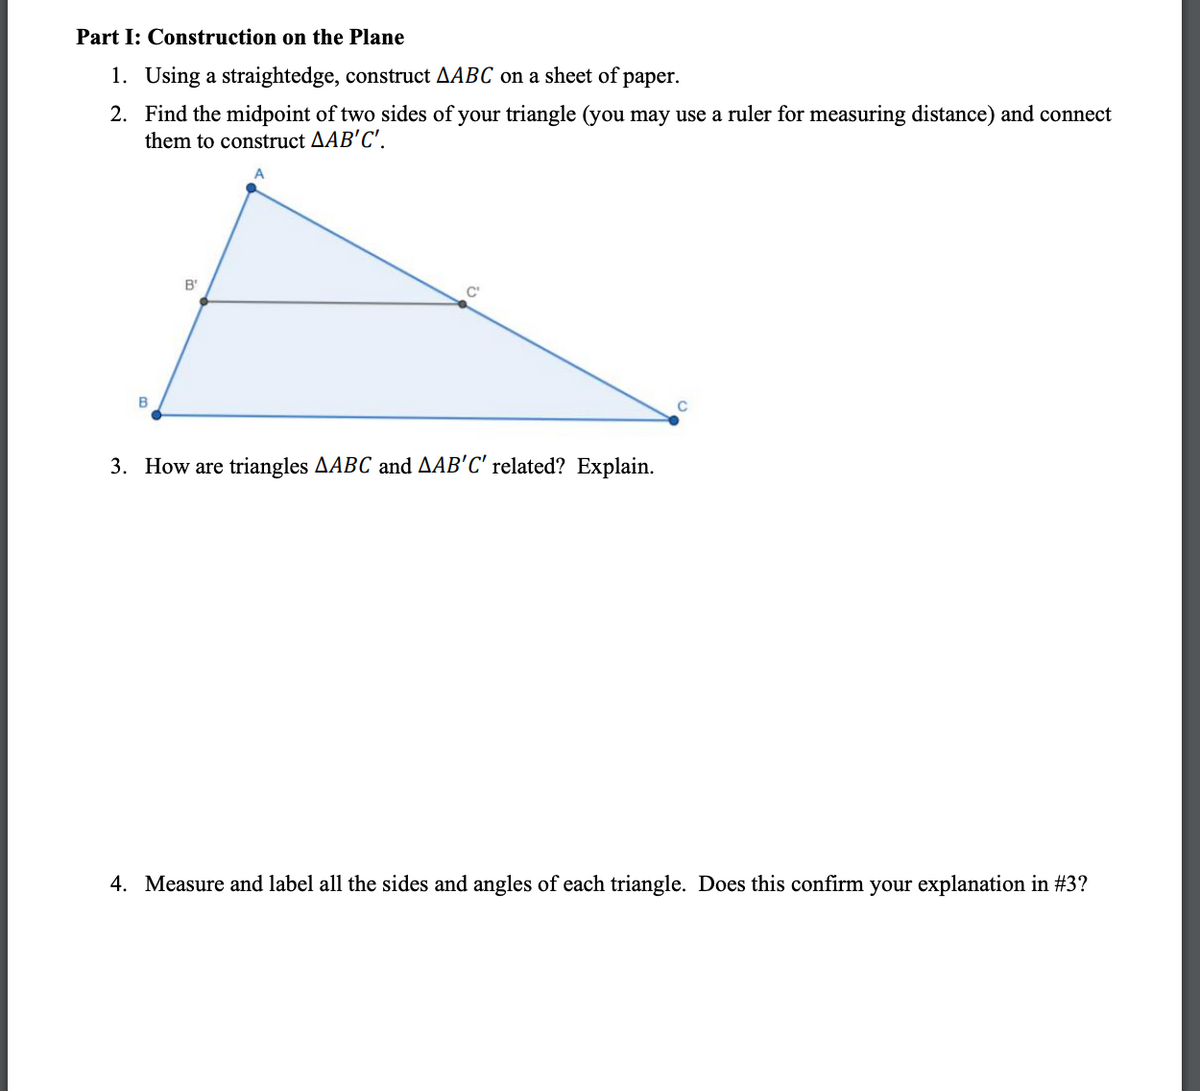 Part I: Construction on the Plane
1. Using a straightedge, construct AABC on a sheet of paper.
2.
Find the midpoint of two sides of your triangle (you may use a ruler for measuring distance) and connect
them to construct AAB'C'.
B
B'
C'
3. How are triangles AABC and AAB'C' related? Explain.
4. Measure and label all the sides and angles of each triangle. Does this confirm your explanation in #3?